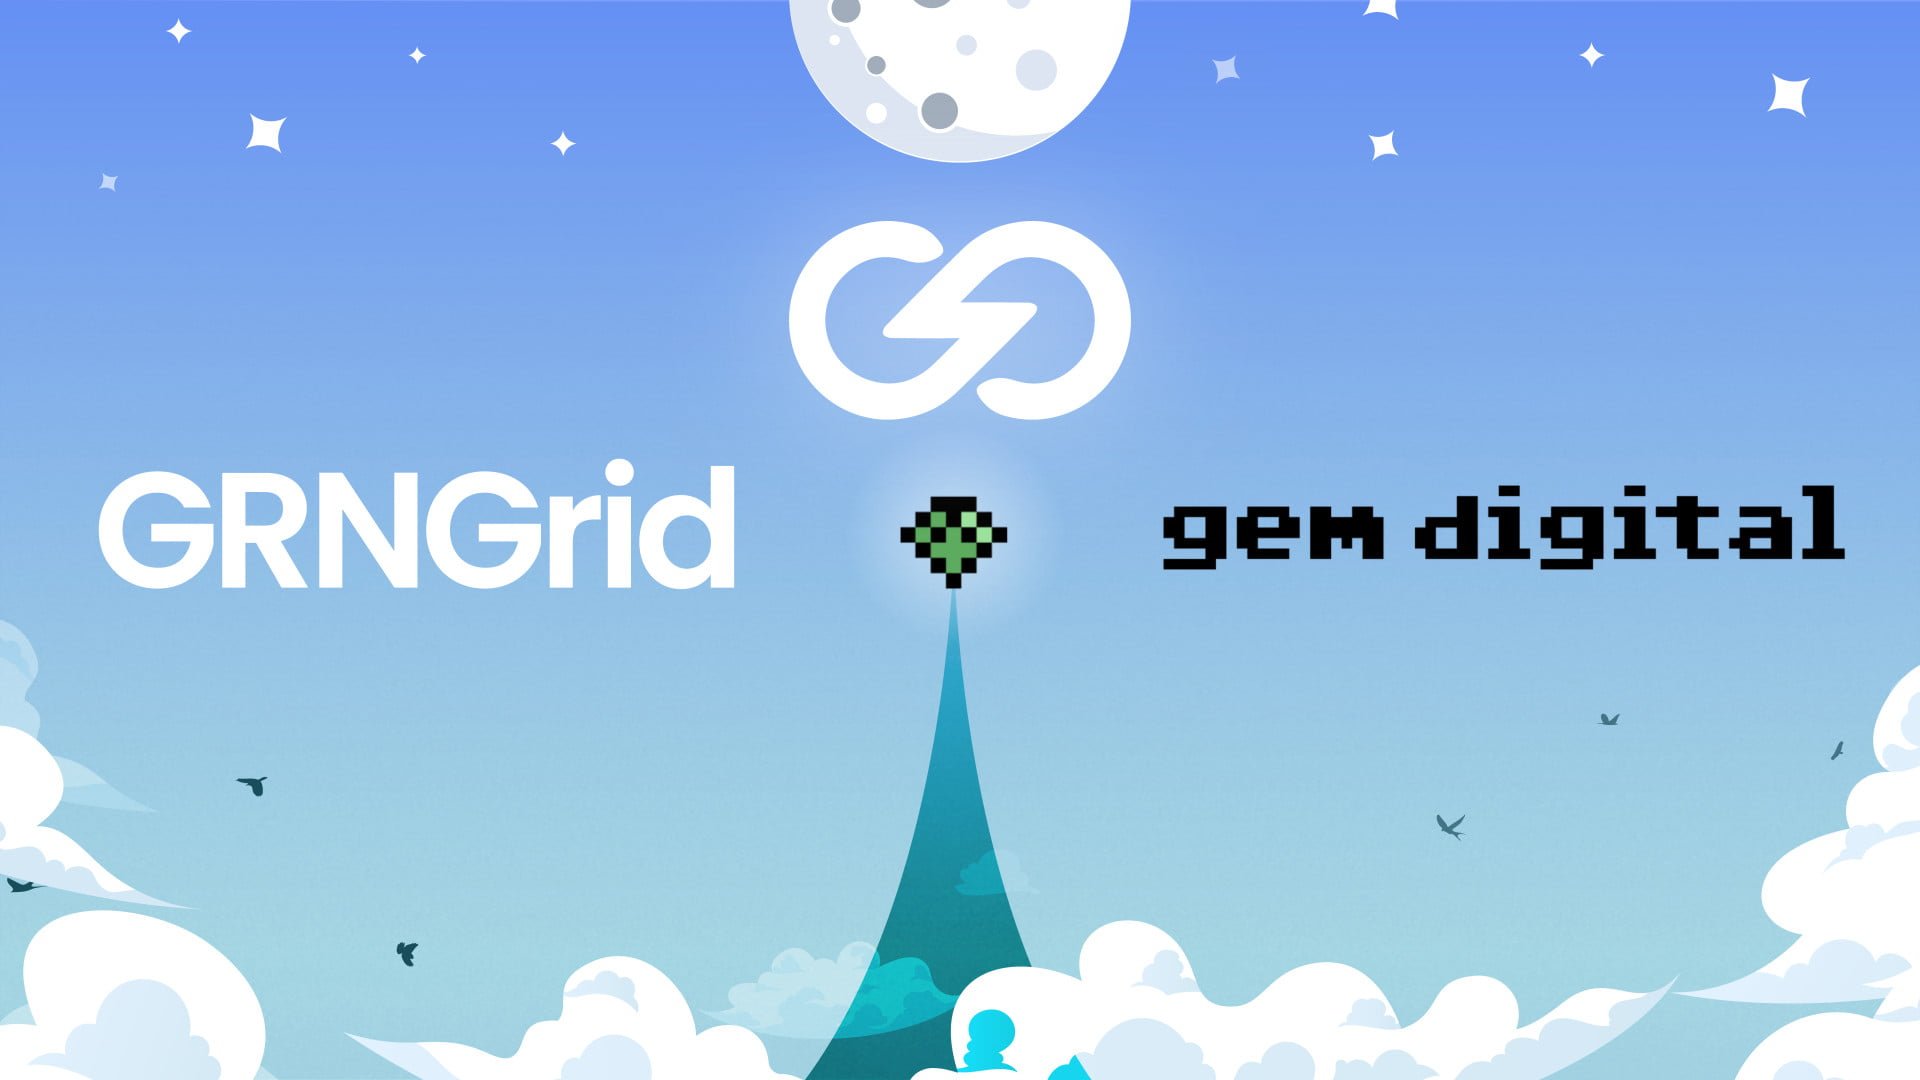 GRNGrid secures 50 million USD investment Commitment from GEM Digital 4